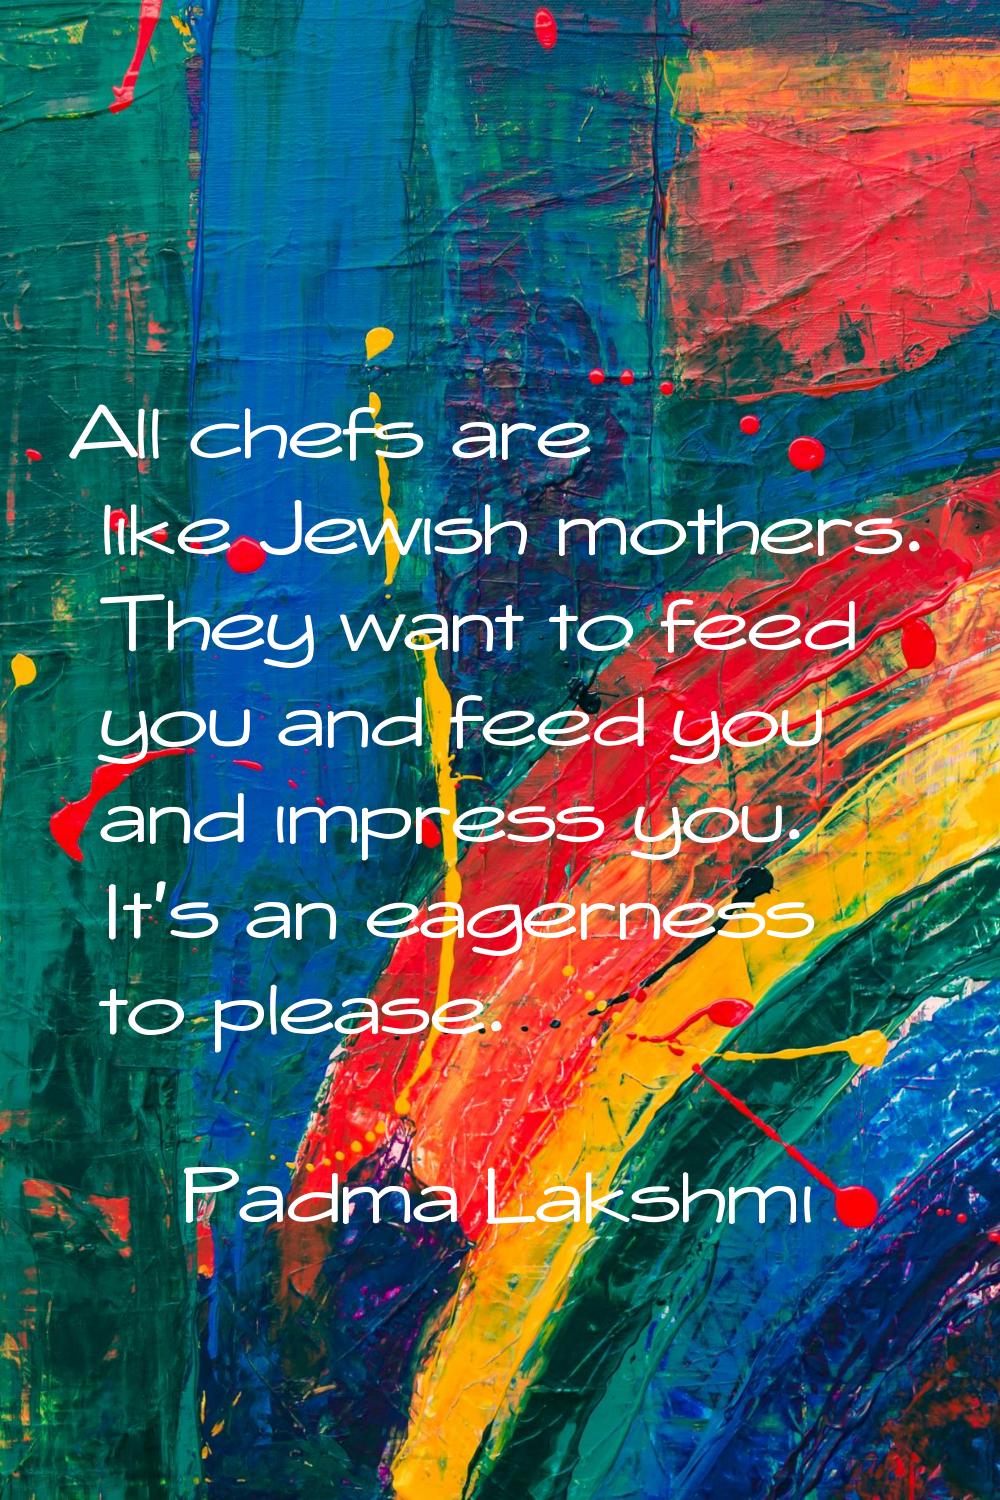 All chefs are like Jewish mothers. They want to feed you and feed you and impress you. It's an eage